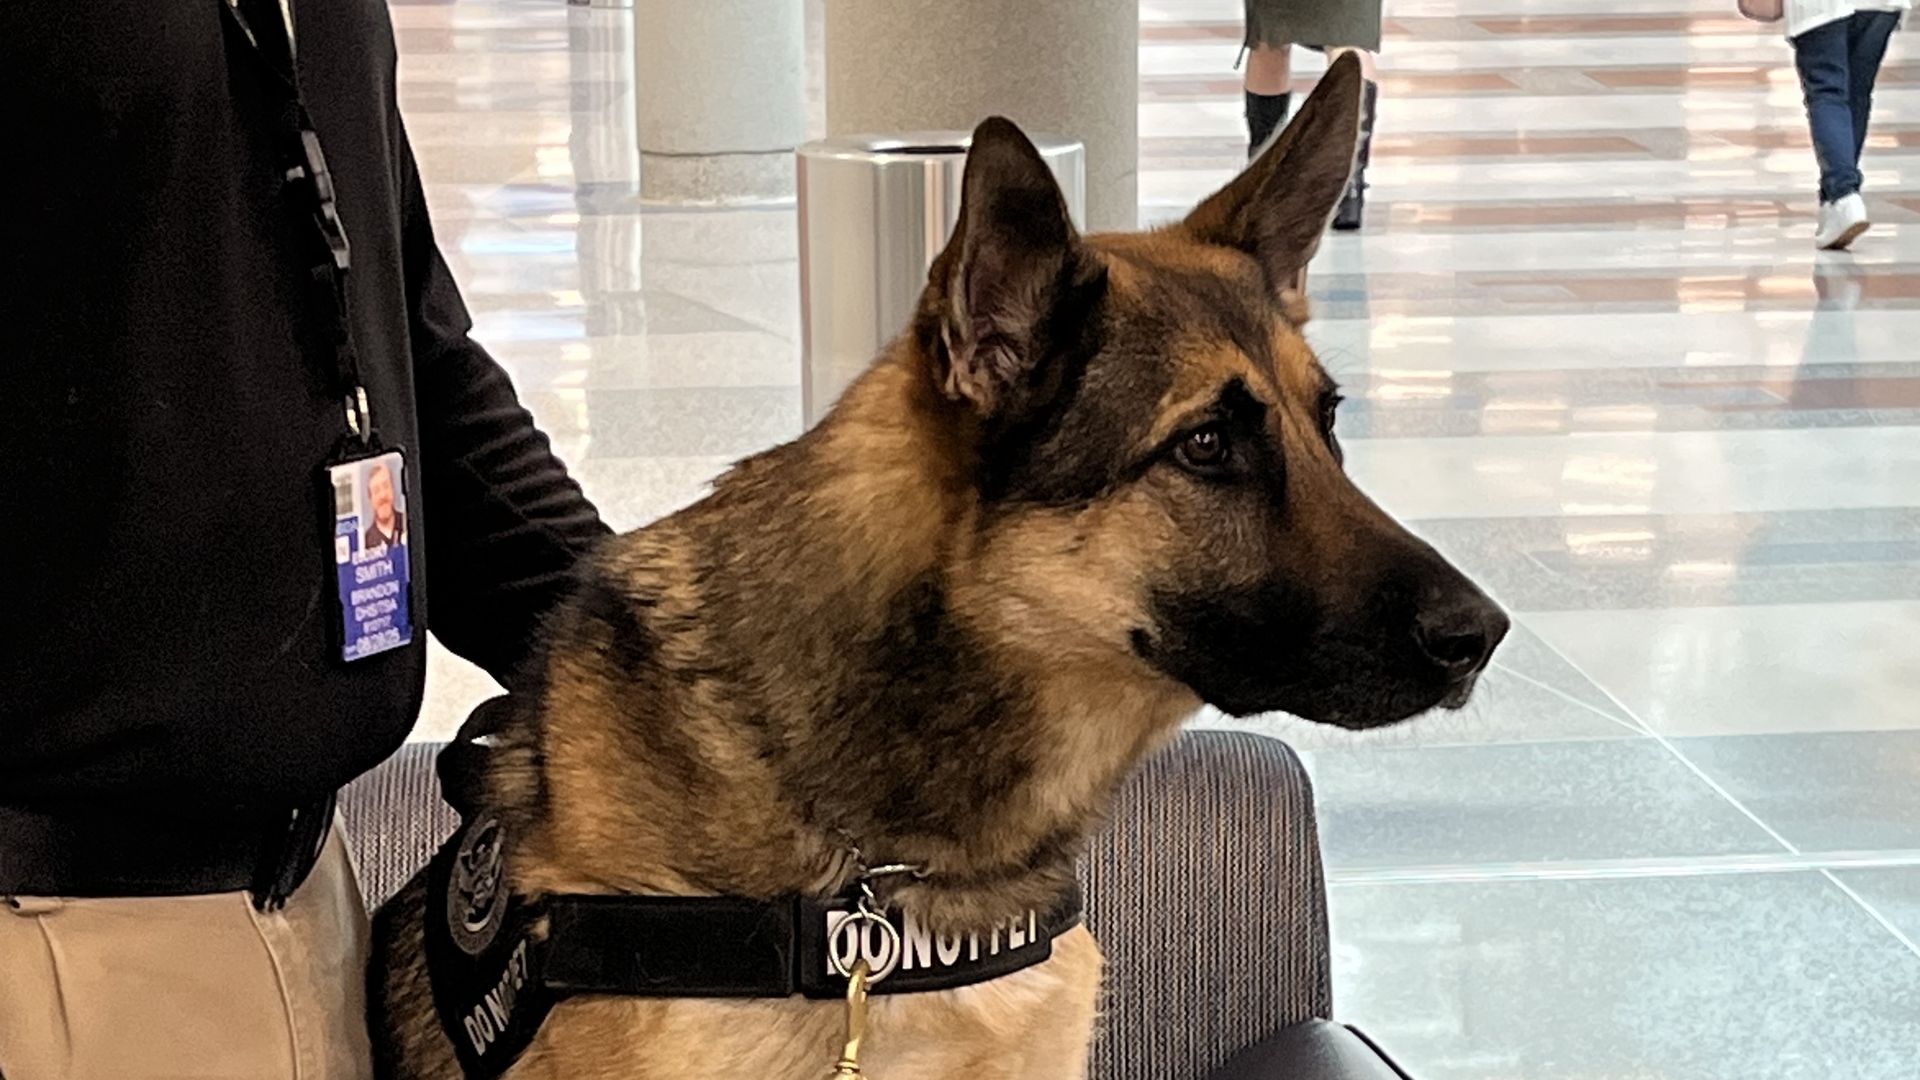 Bomb-sniffing Dog at Minnesota Airport Showered in Toys During Retirement